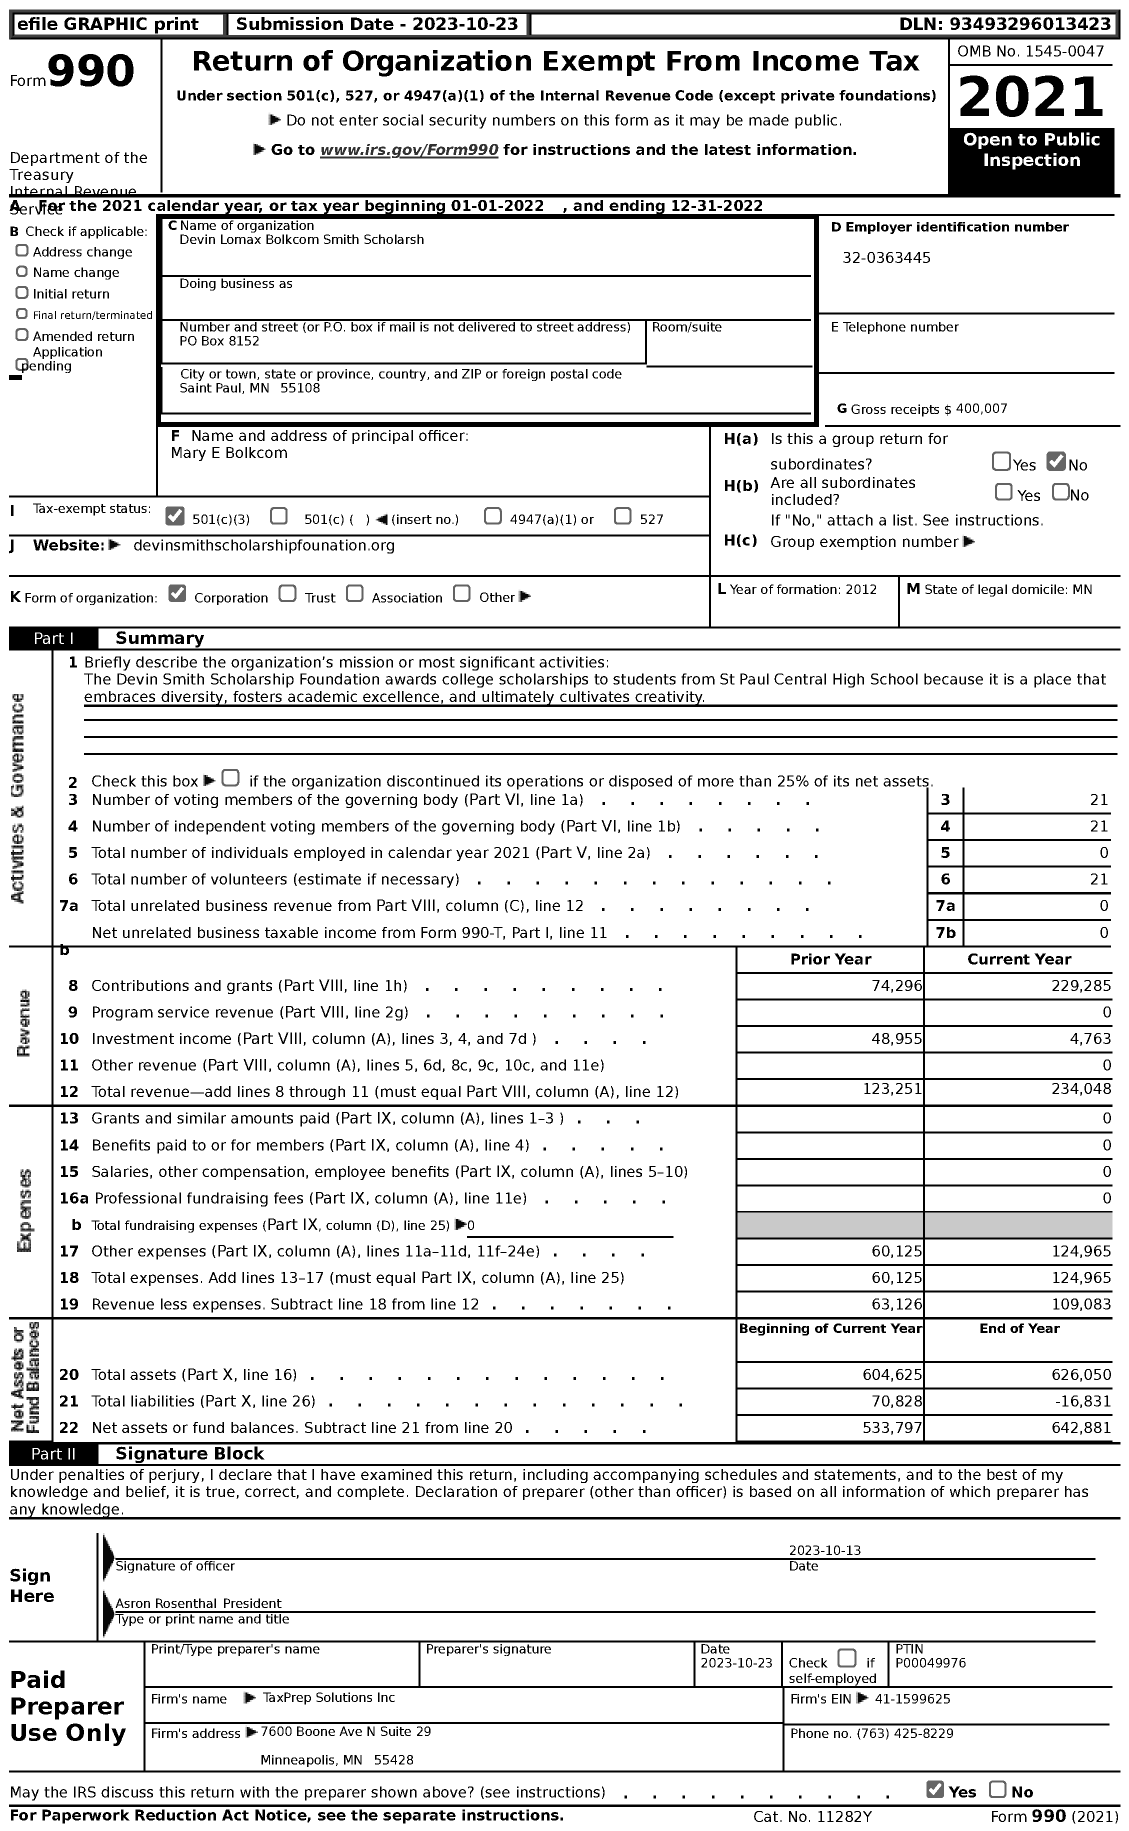 Image of first page of 2022 Form 990 for Devin Lomax Bolkcom Smith Scholarsh